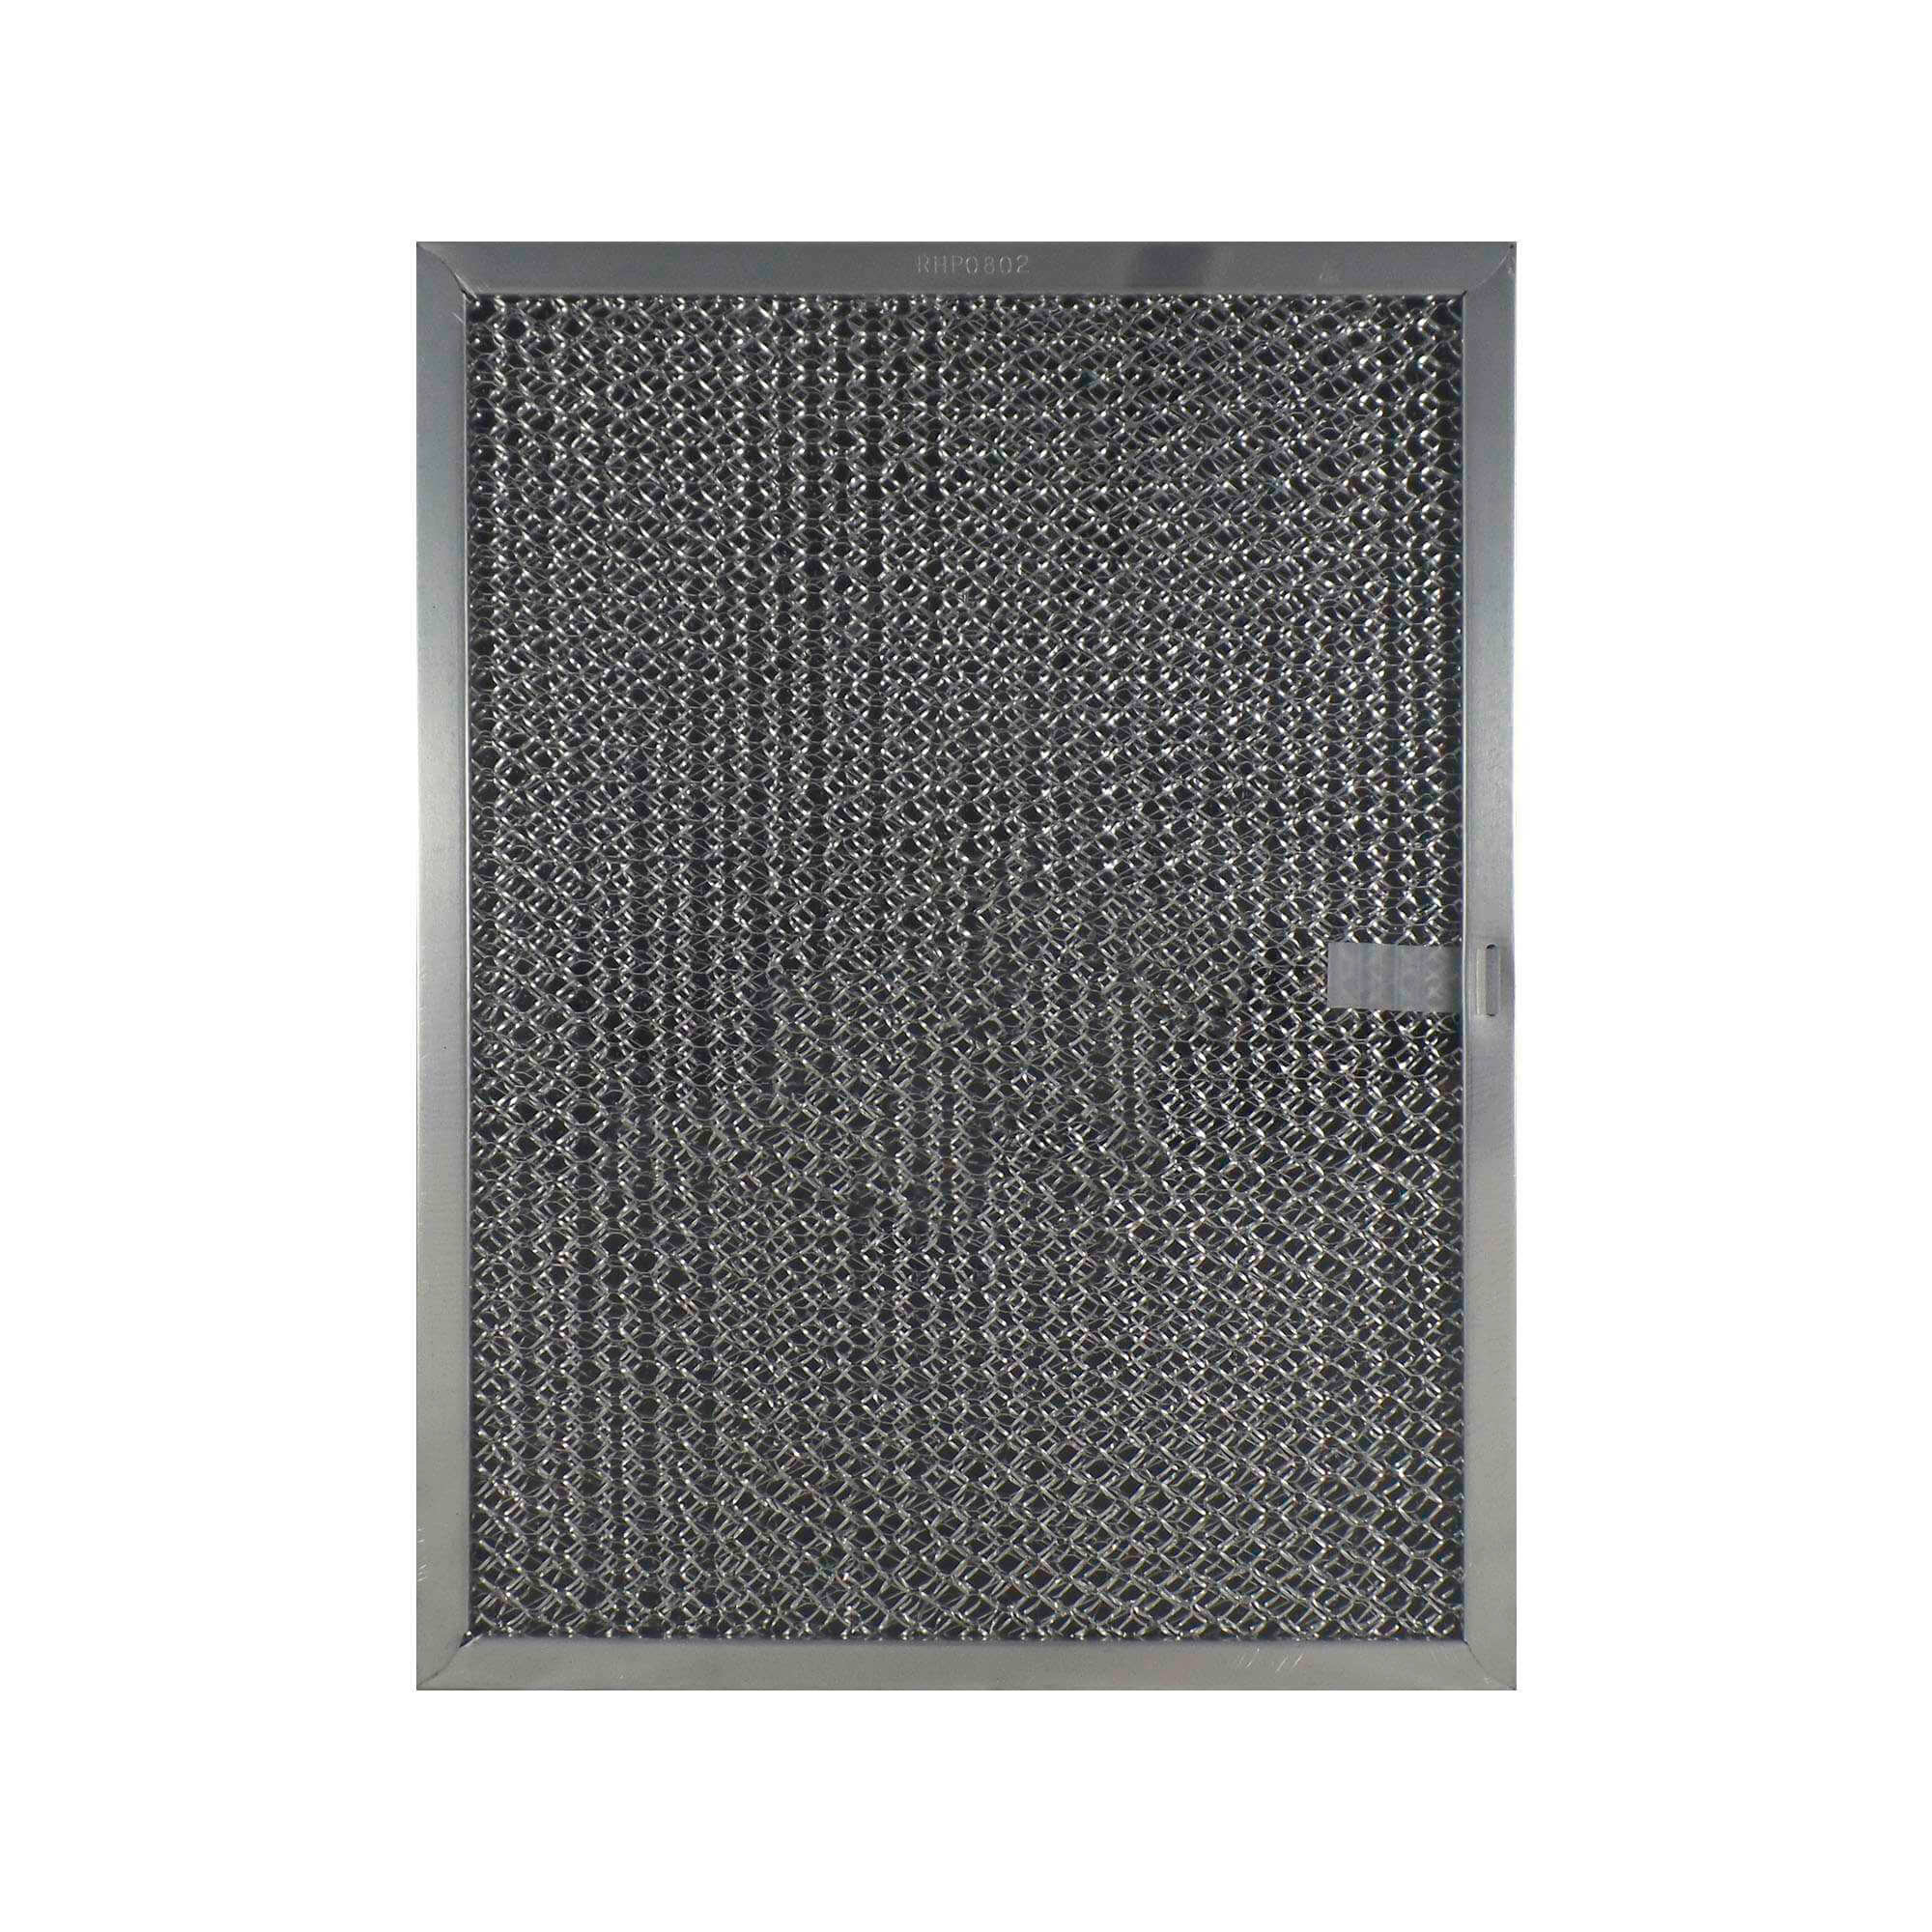 Replacement Combo Charcoal Grease Filter For Broan Nutone LL62F LL6200 MM 6500 